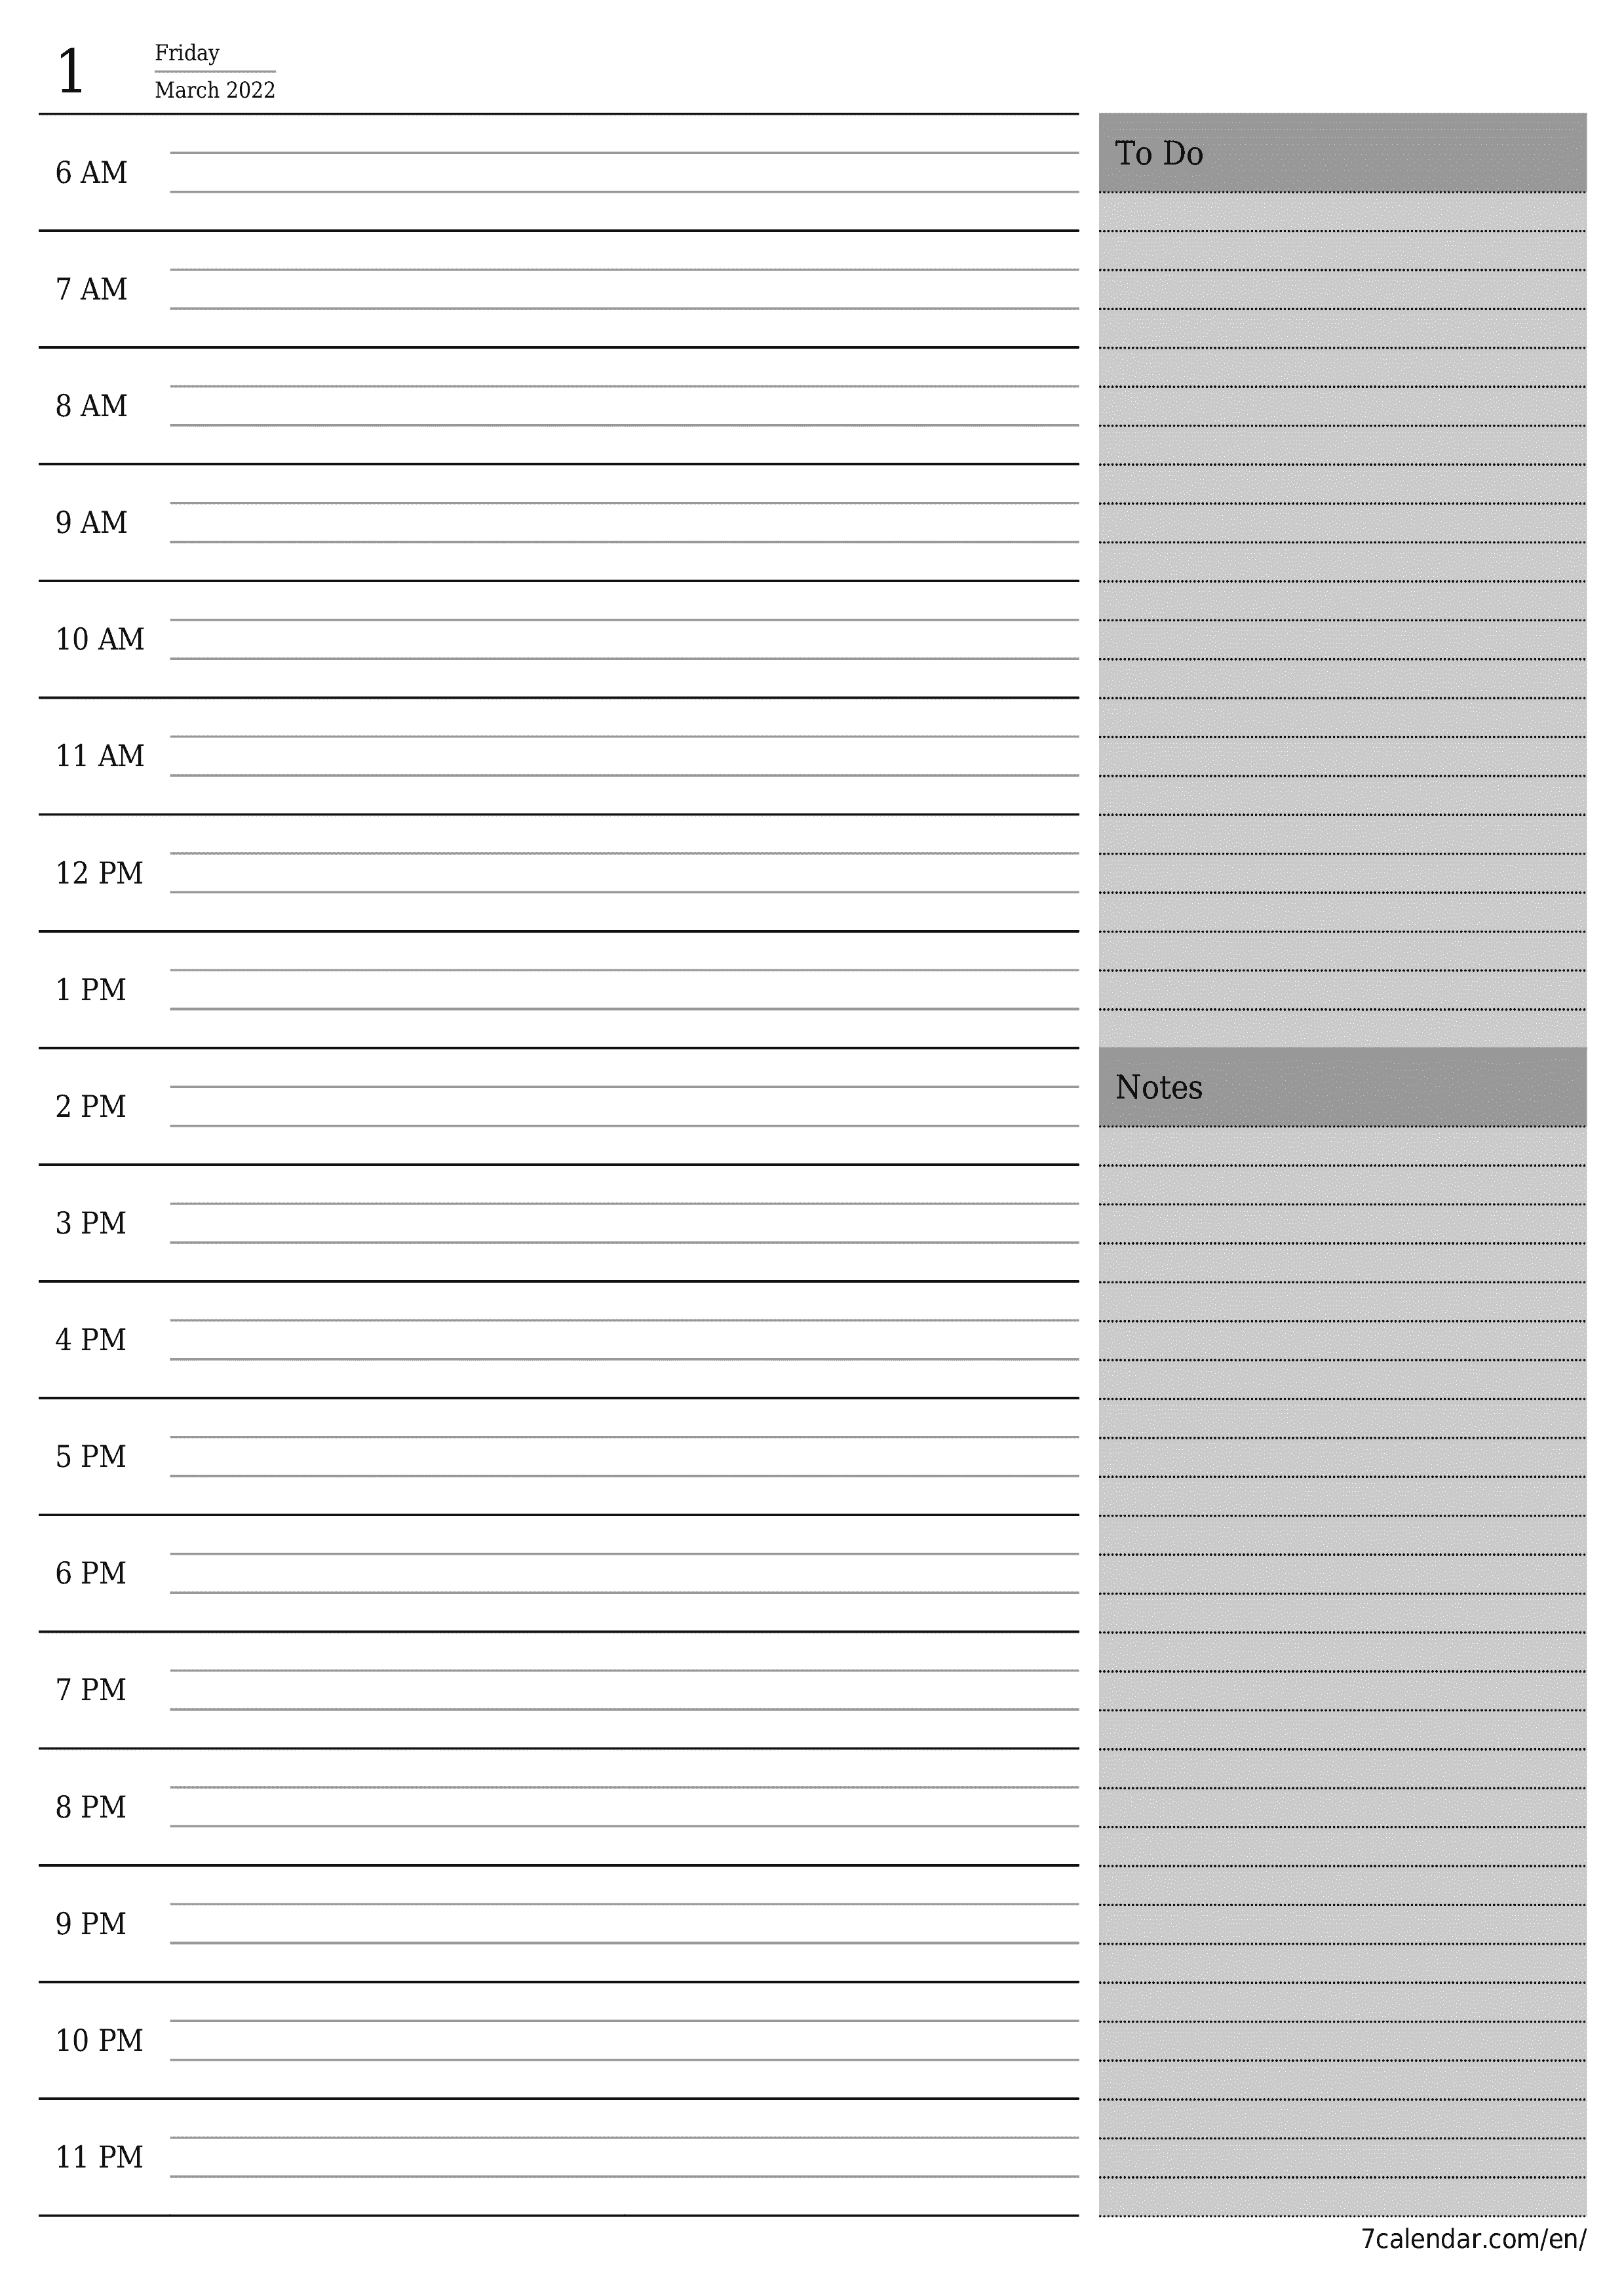 Blank daily printable calendar and planner for day March 2022 with notes, save and print to PDF PNG English - 7calendar.com